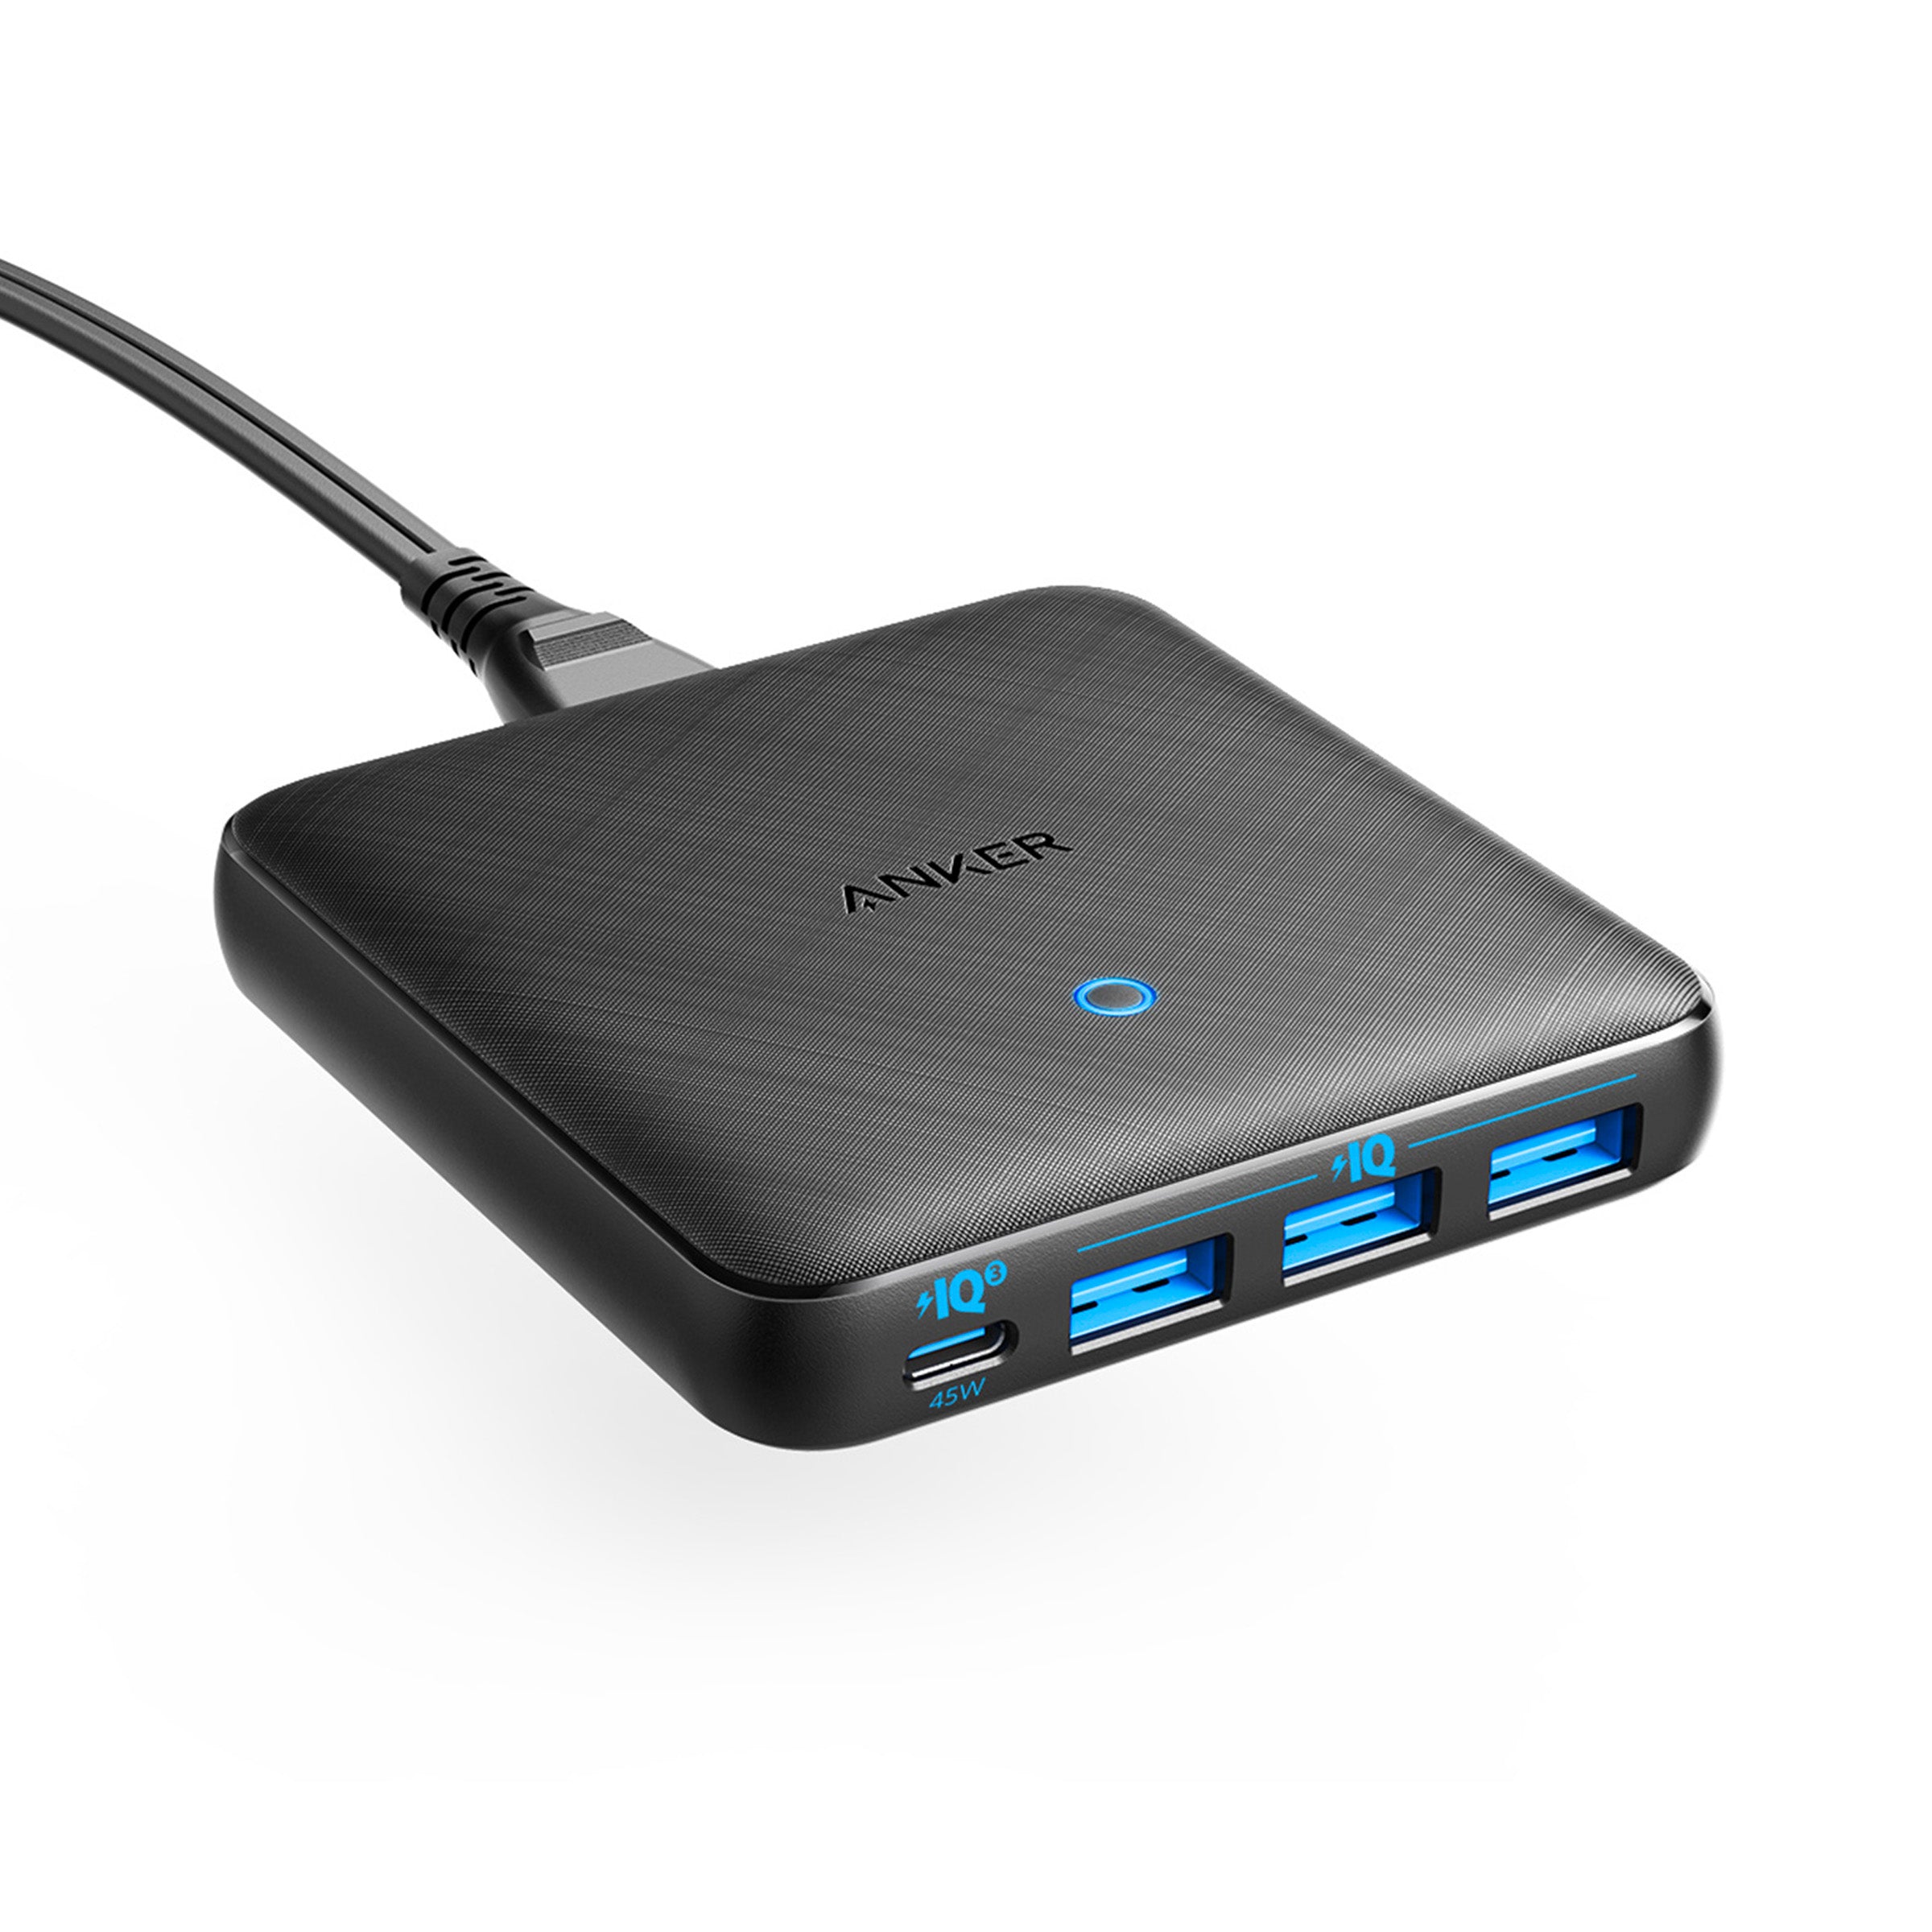 Anker  Live Charged. - Anker Europe